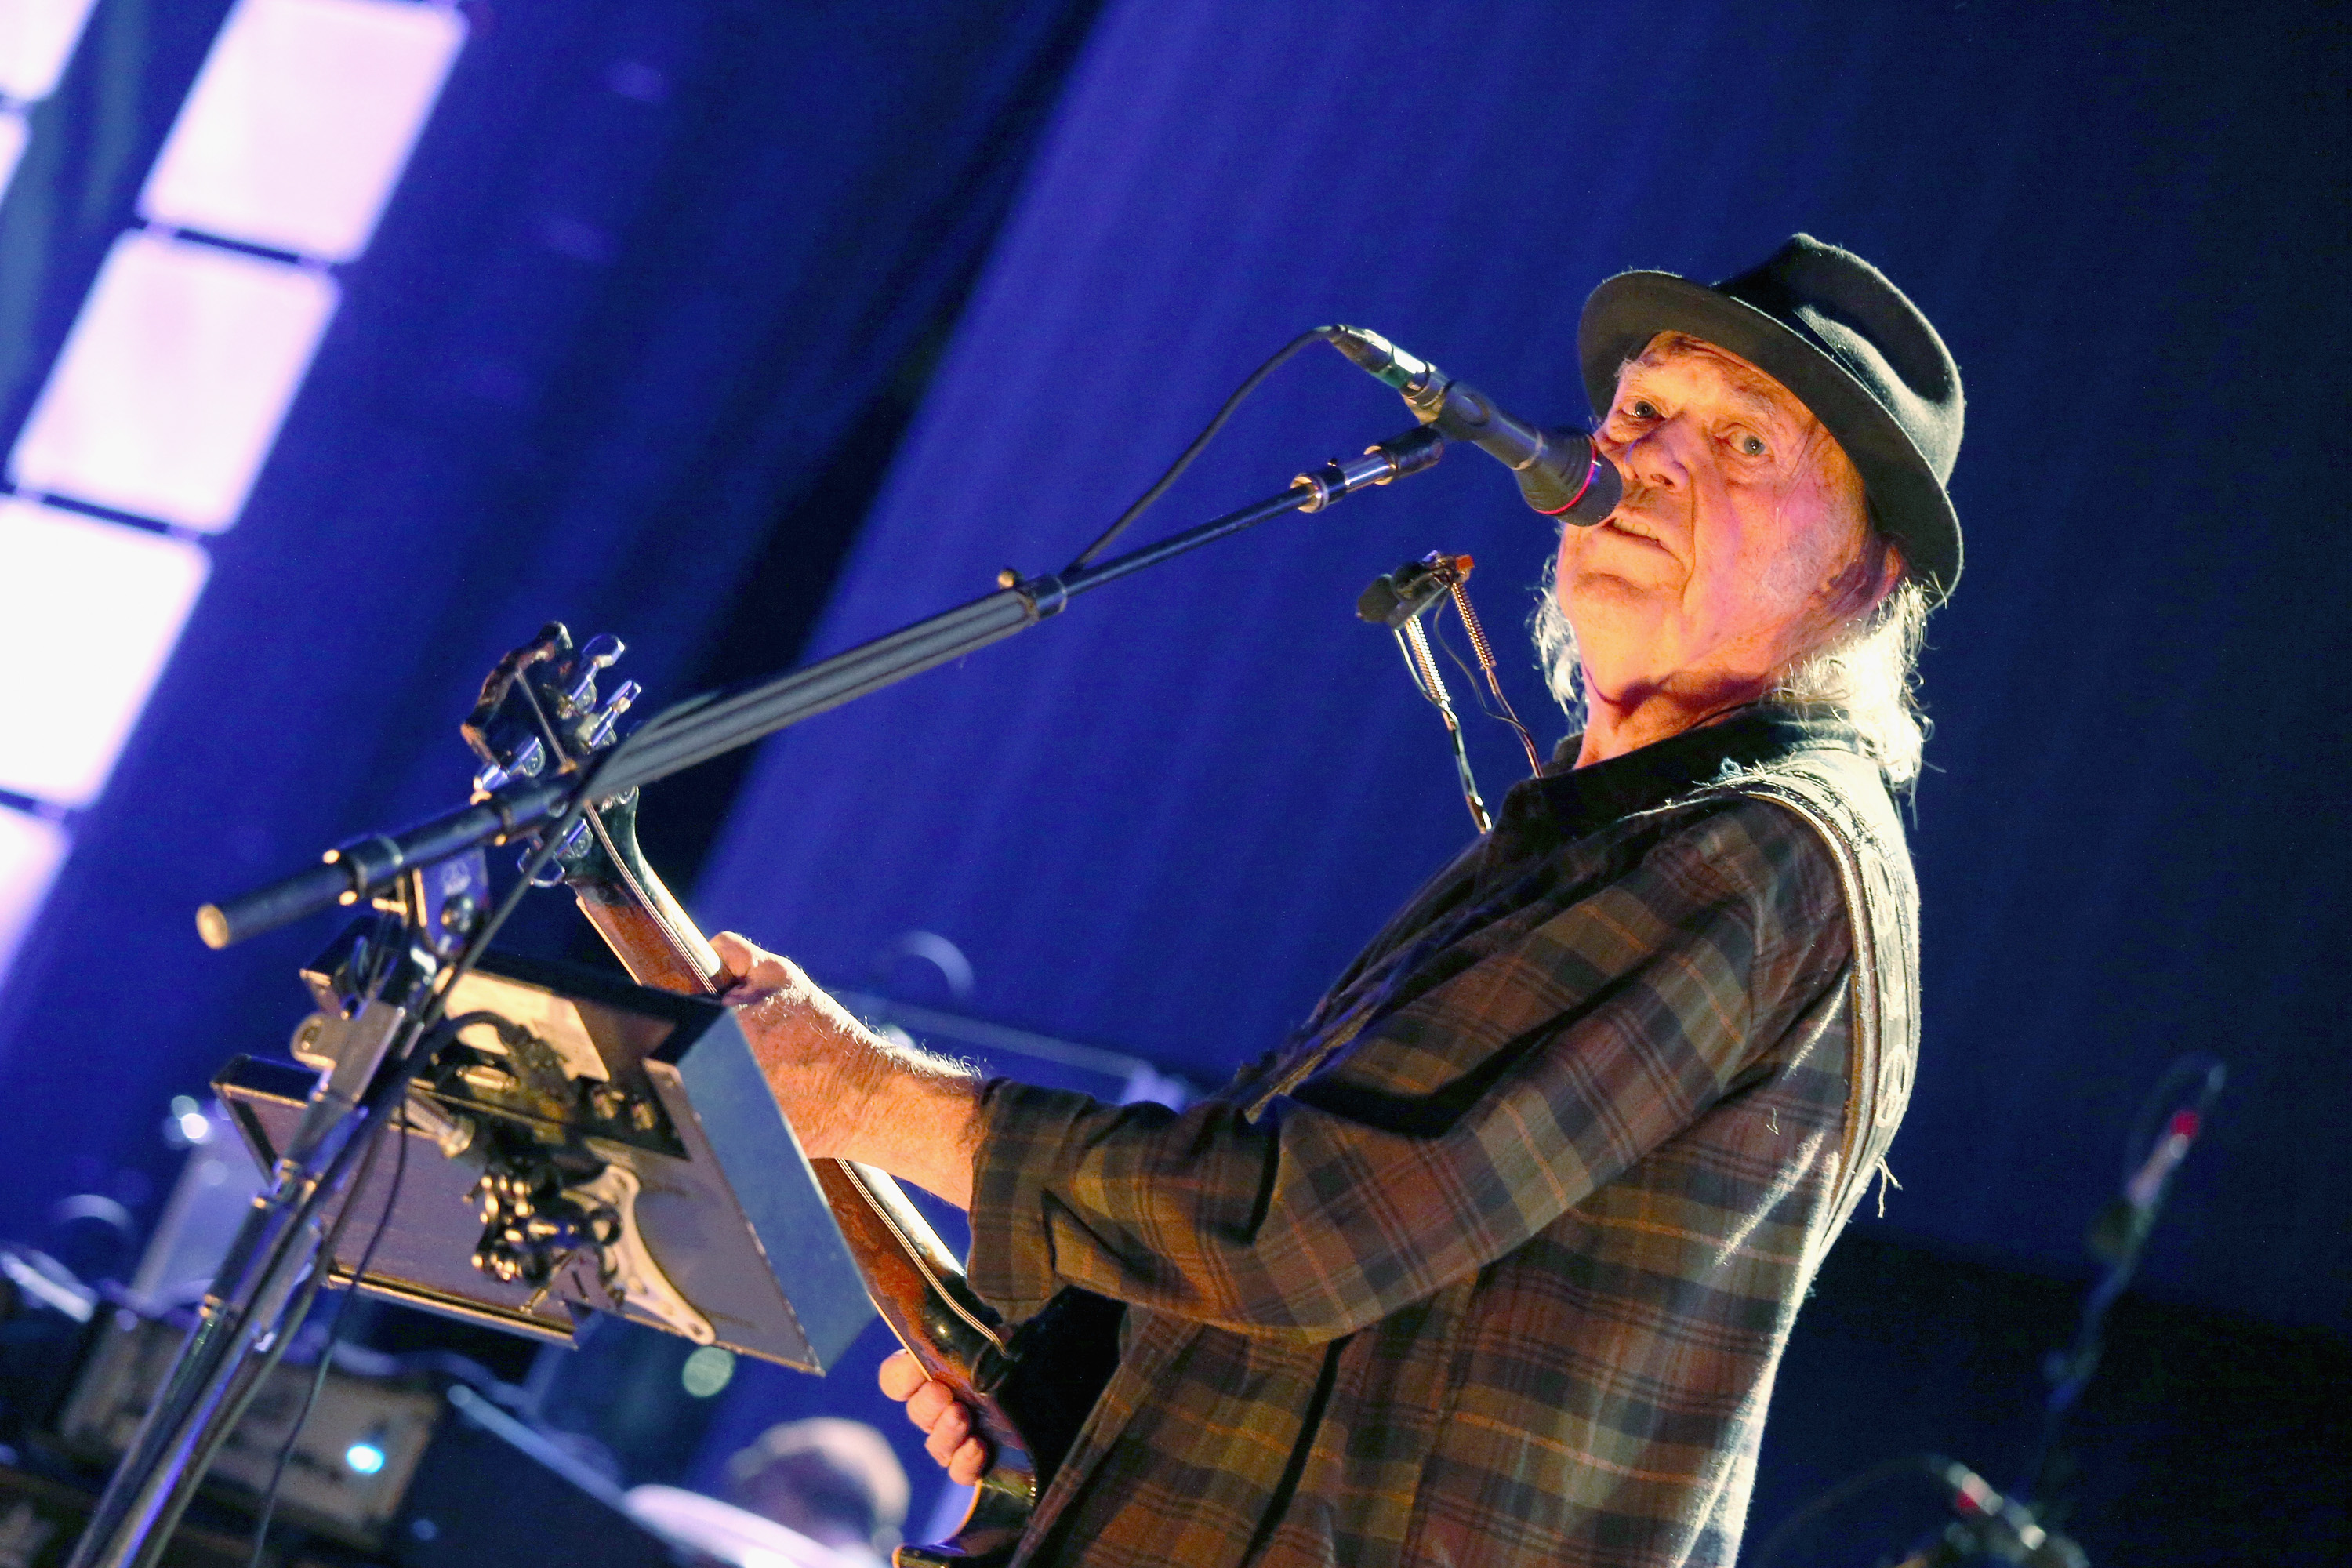 Neil Young performs on stage in a hat and flannel shirt.